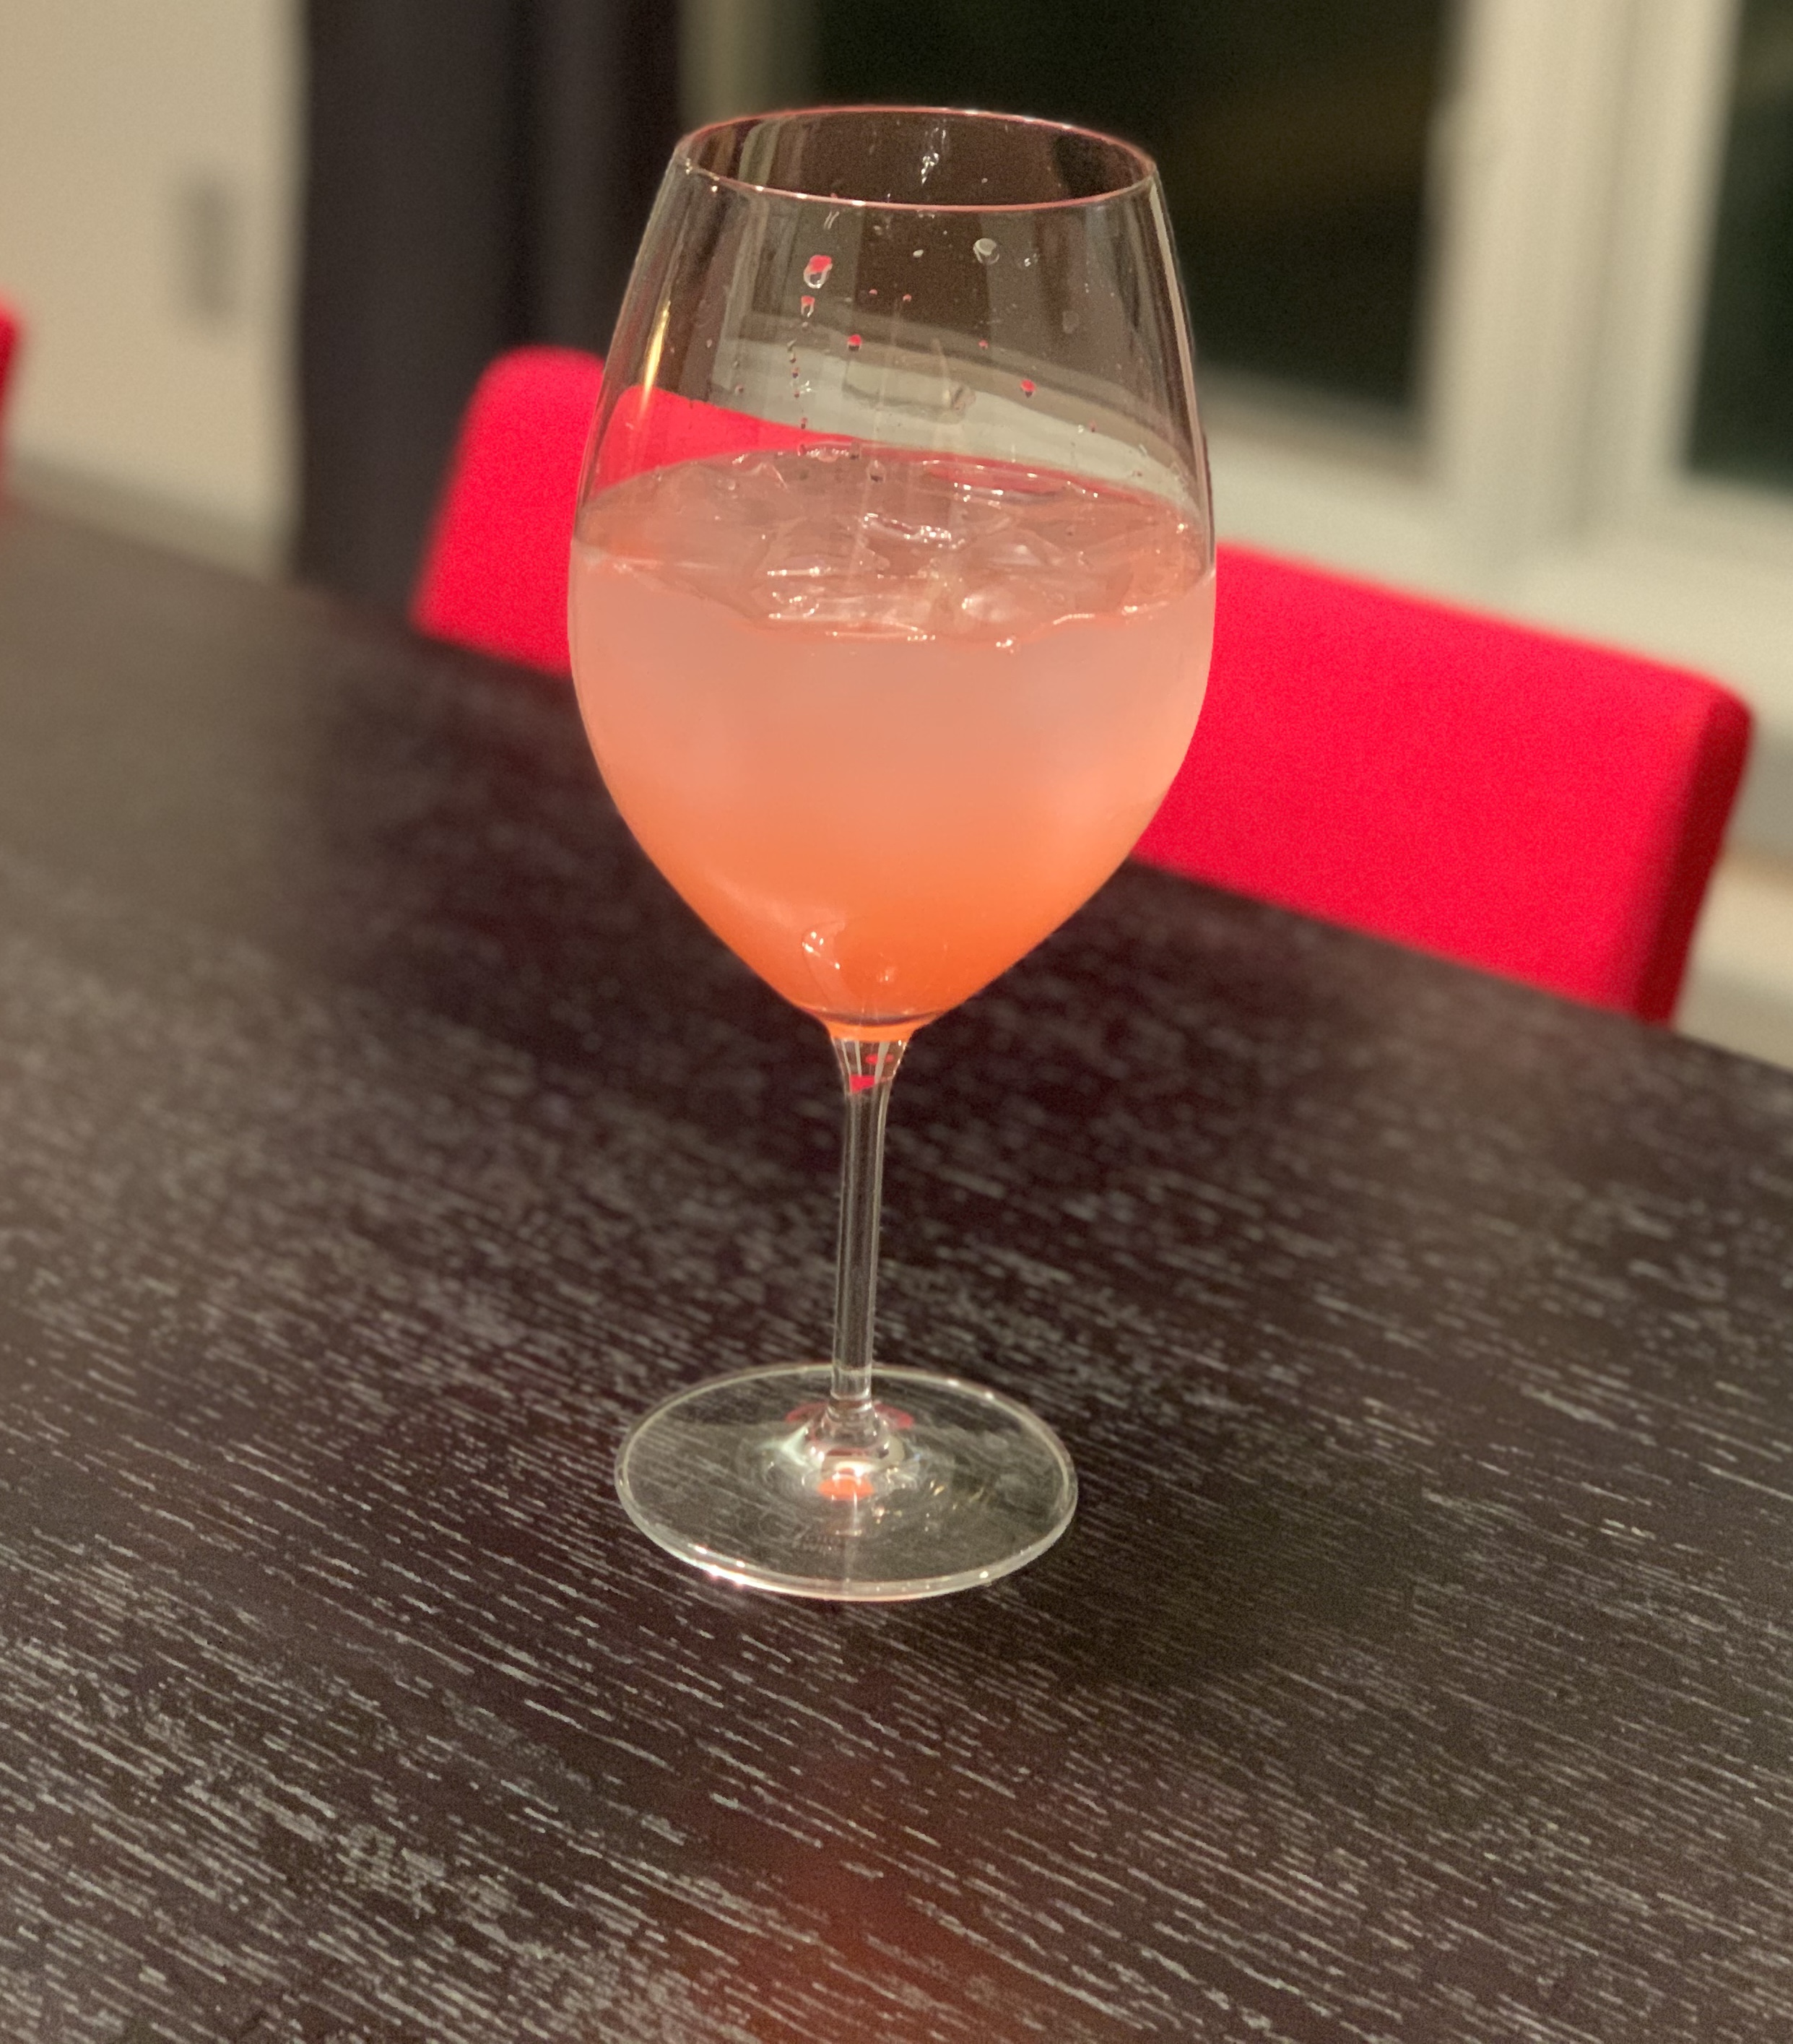 In a stemmed wine glass, there is a pink cocktail. The glass is on a black, wood-grained table. Photo by Stephanie Wheatley.